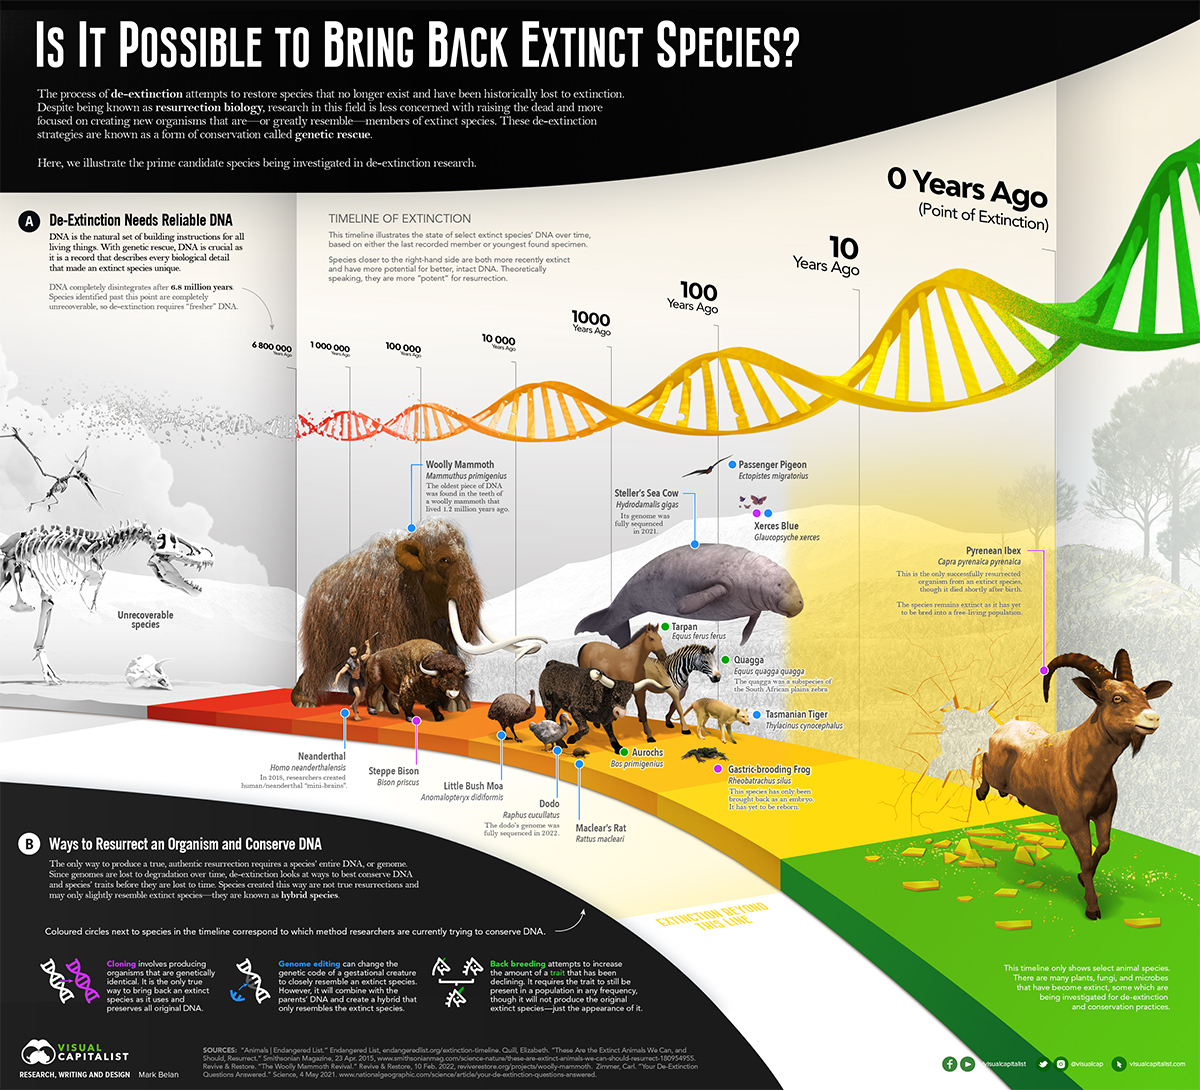 resurrection biology - is it possible to bring back extinct animals?